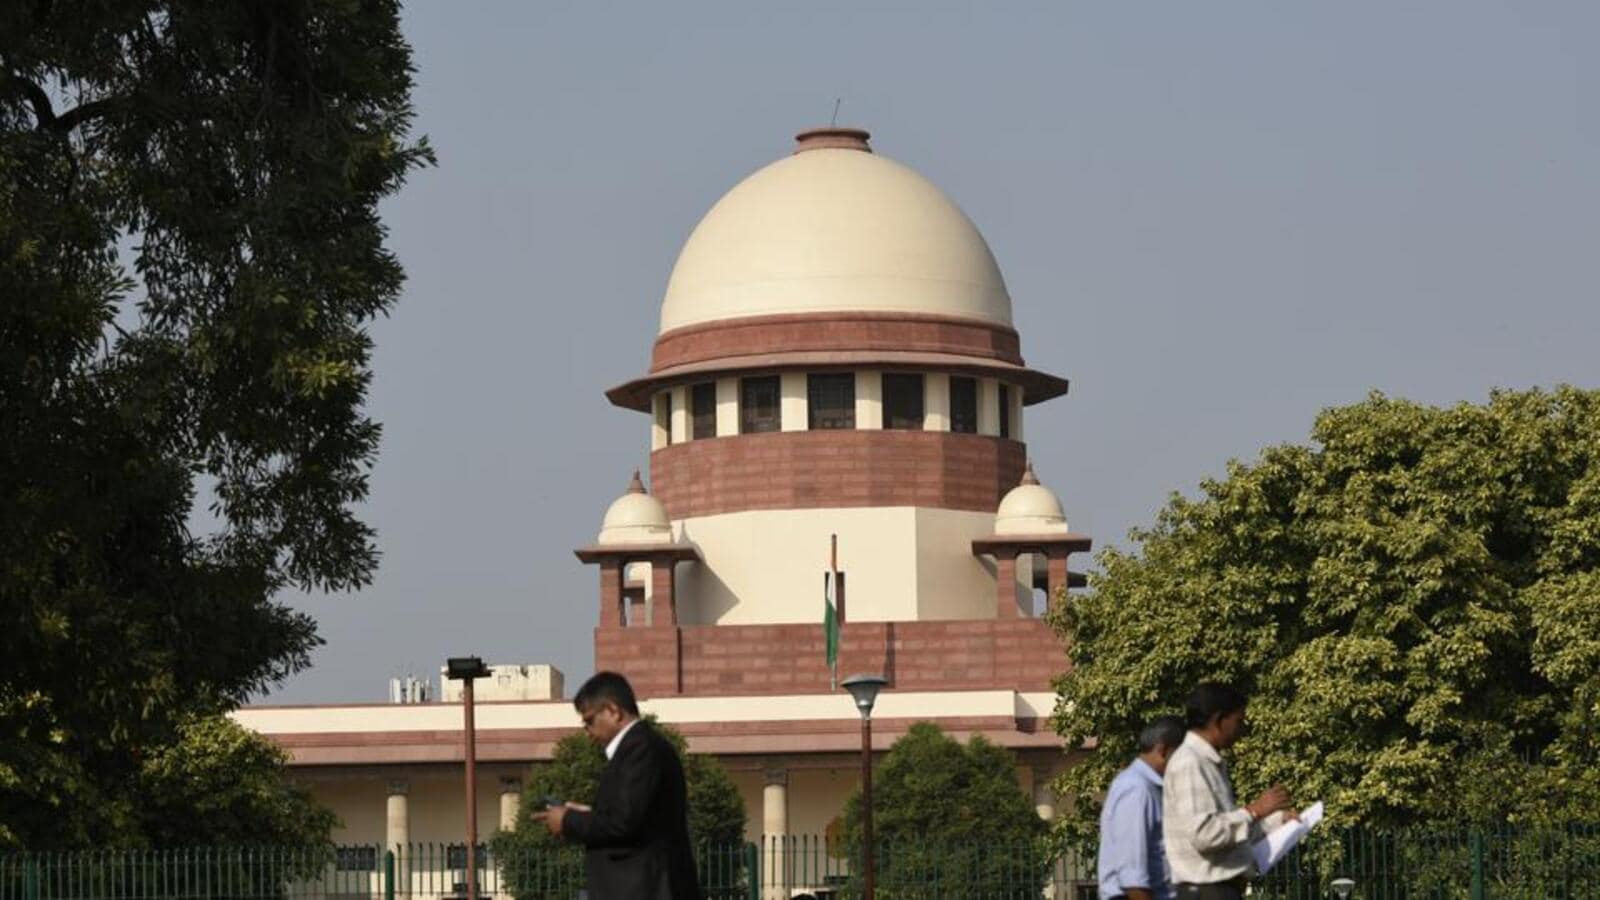 ‘Has he vanished into thin air’: SC rebukes UP govt on missing Covid patient